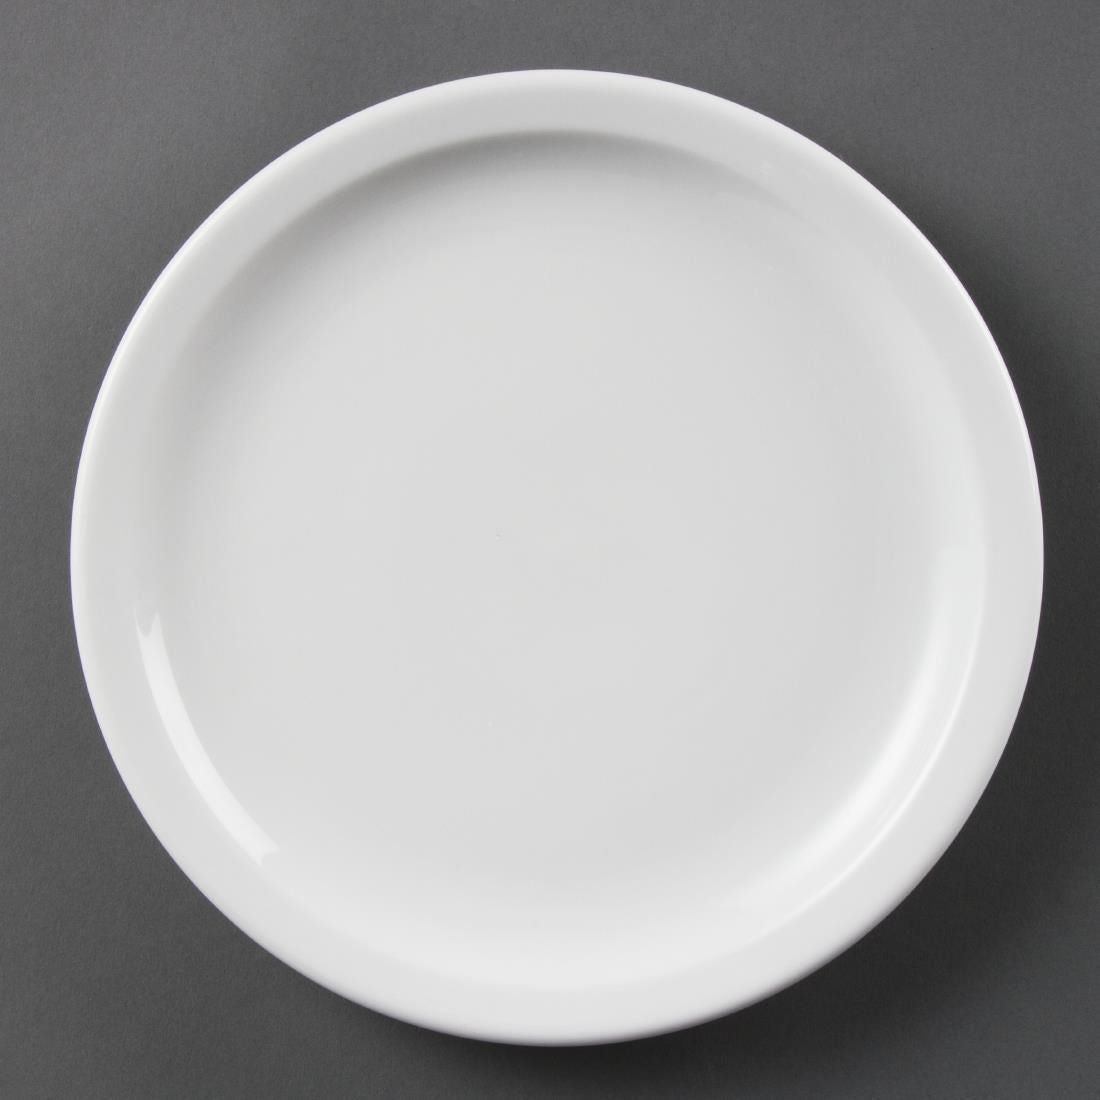 CB489 Olympia Whiteware Narrow Rimmed Plates 230mm (Pack of 12)